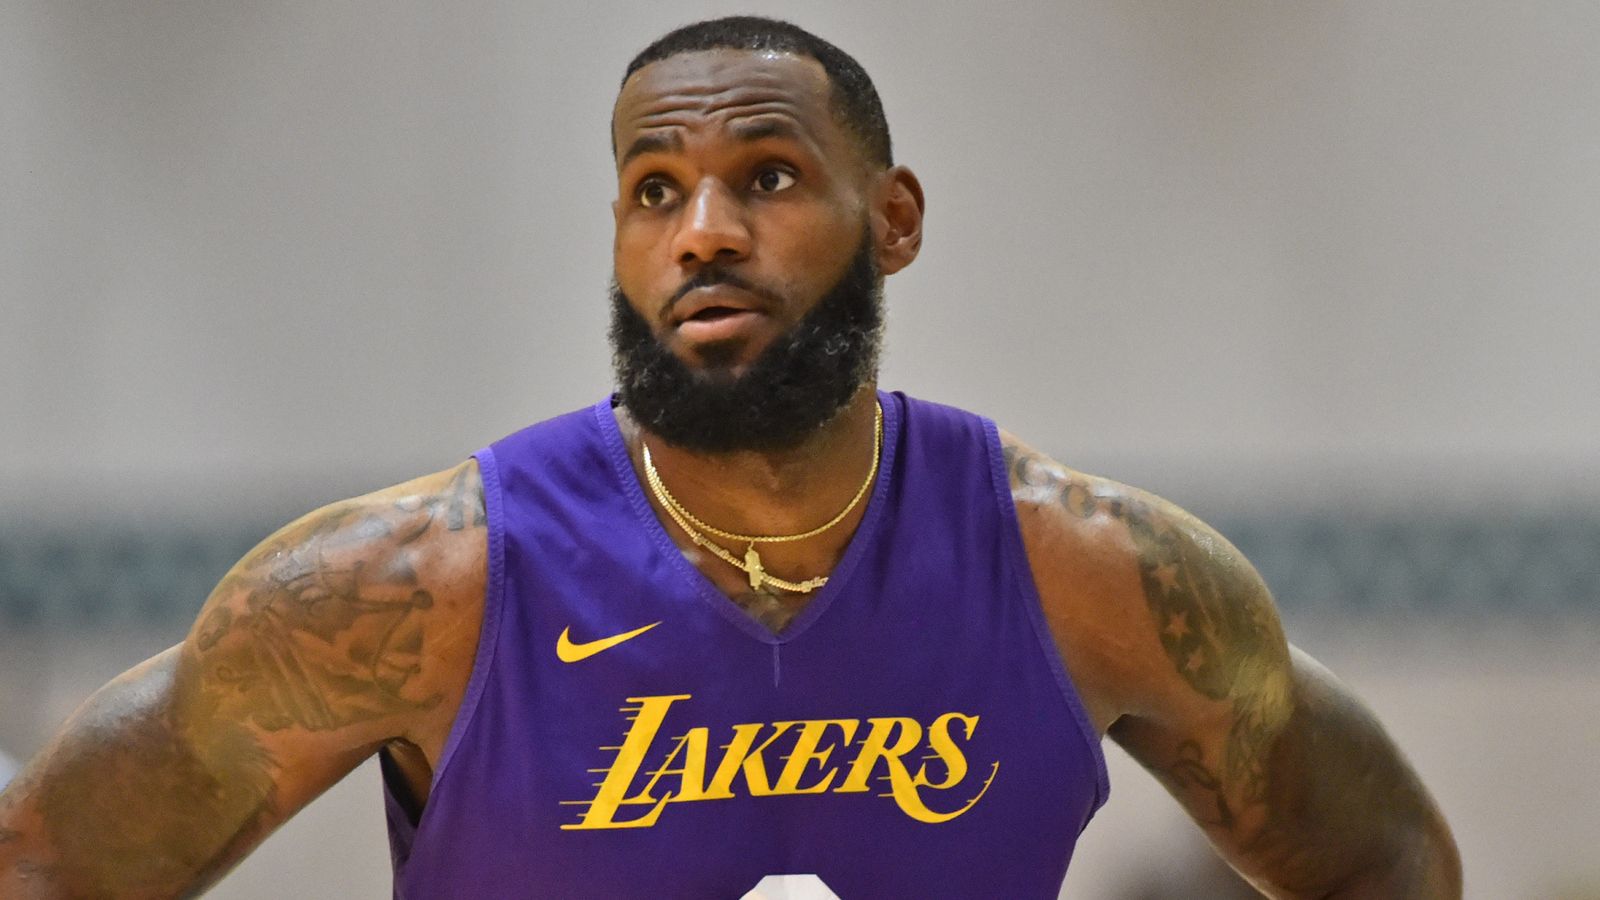 The LeBron Ecosystem: How The Los Angeles Lakers' Environment Has